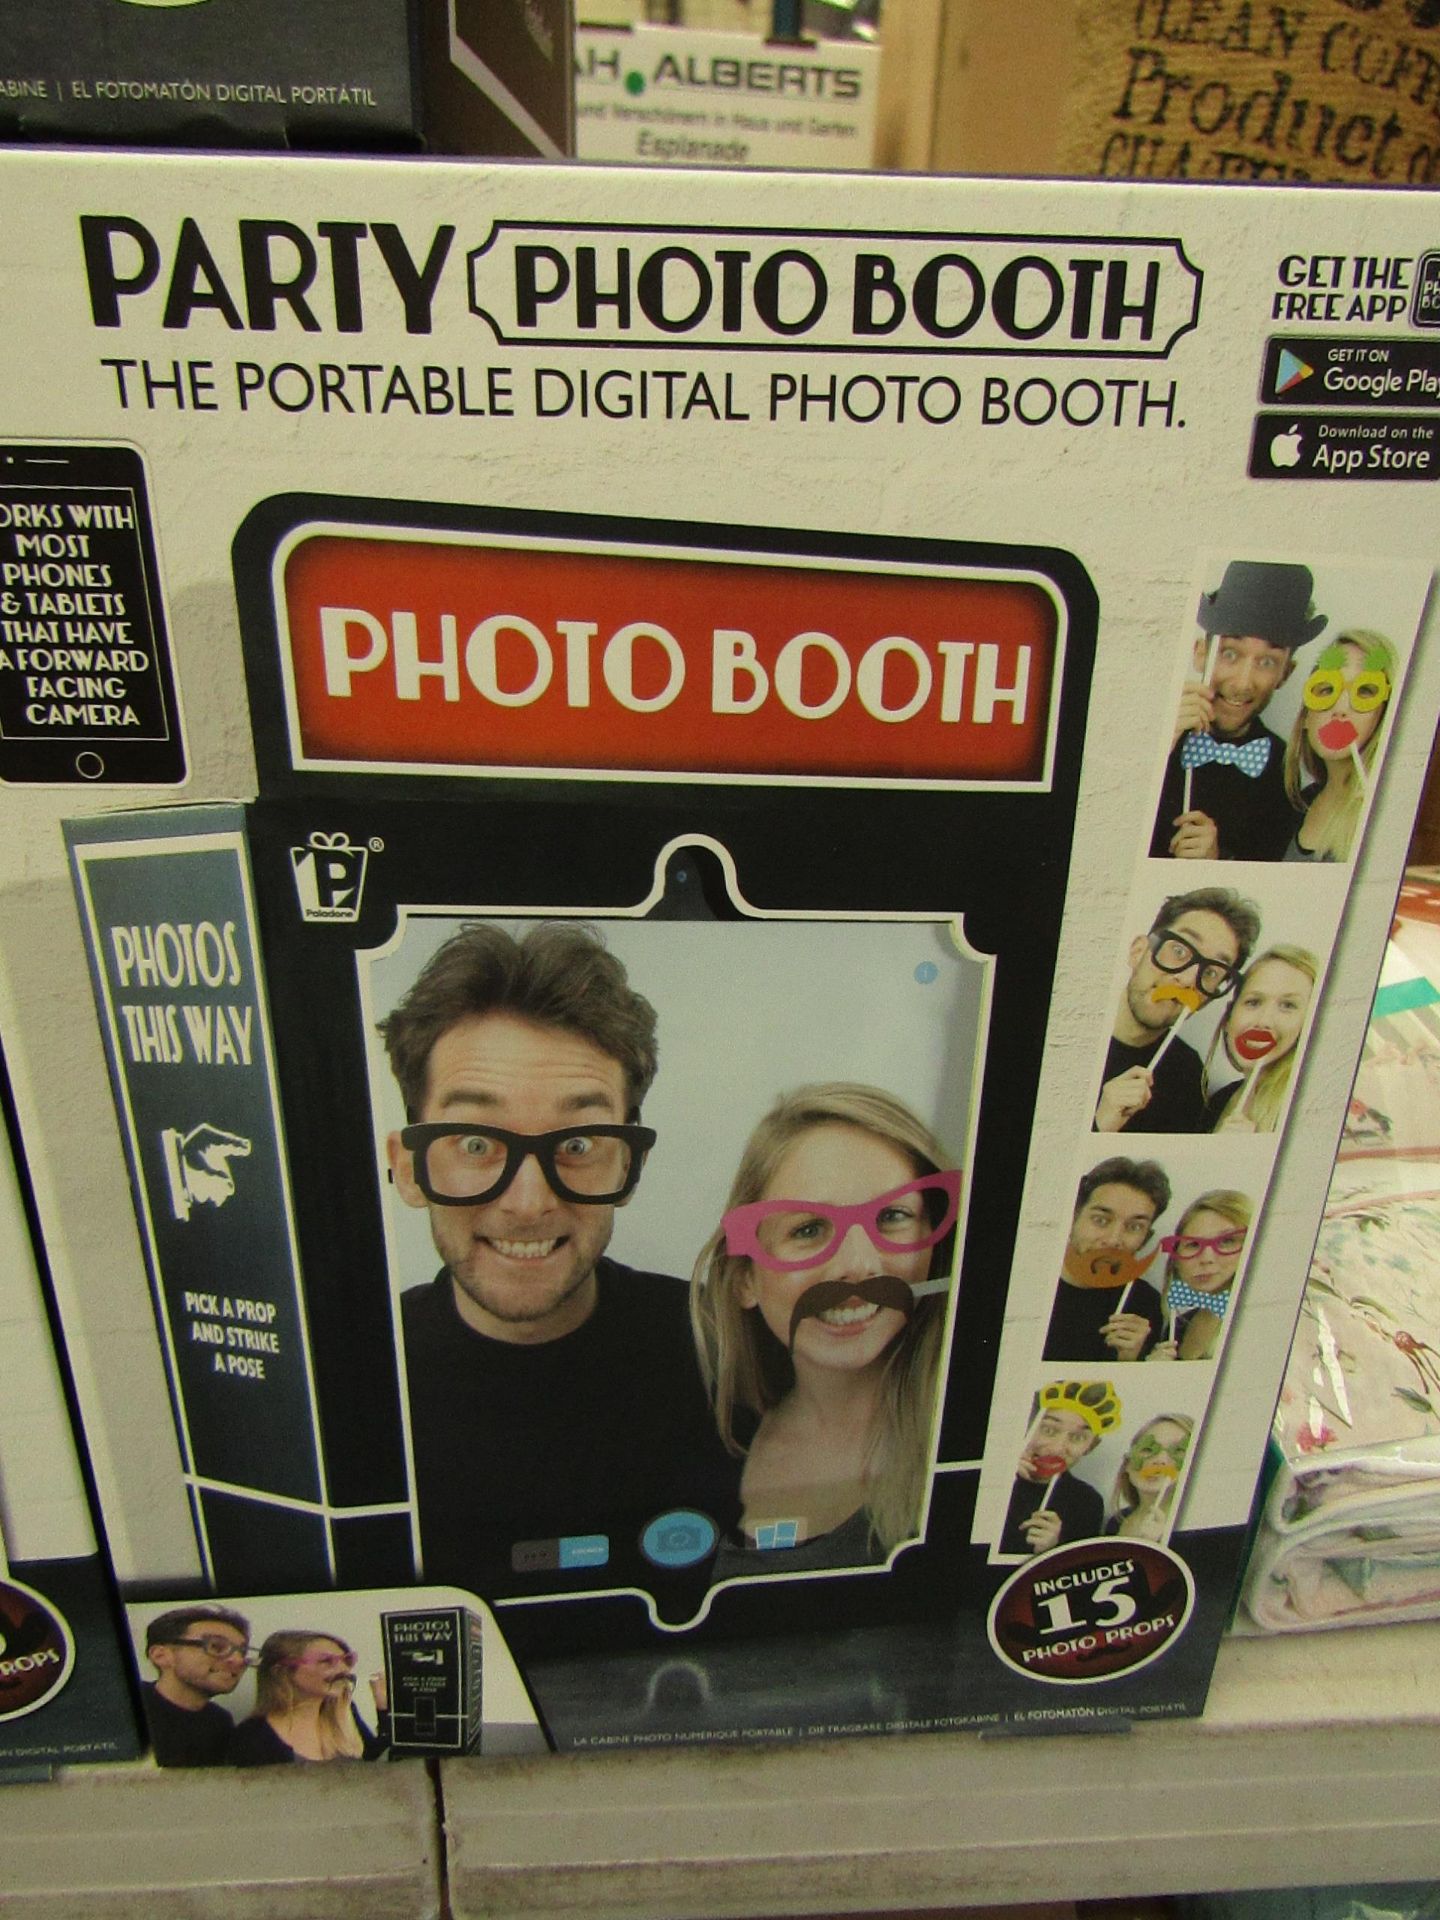 Paladone - Partry Photo Booth - Portable Digital Photo Booth - Look New & Boxed.